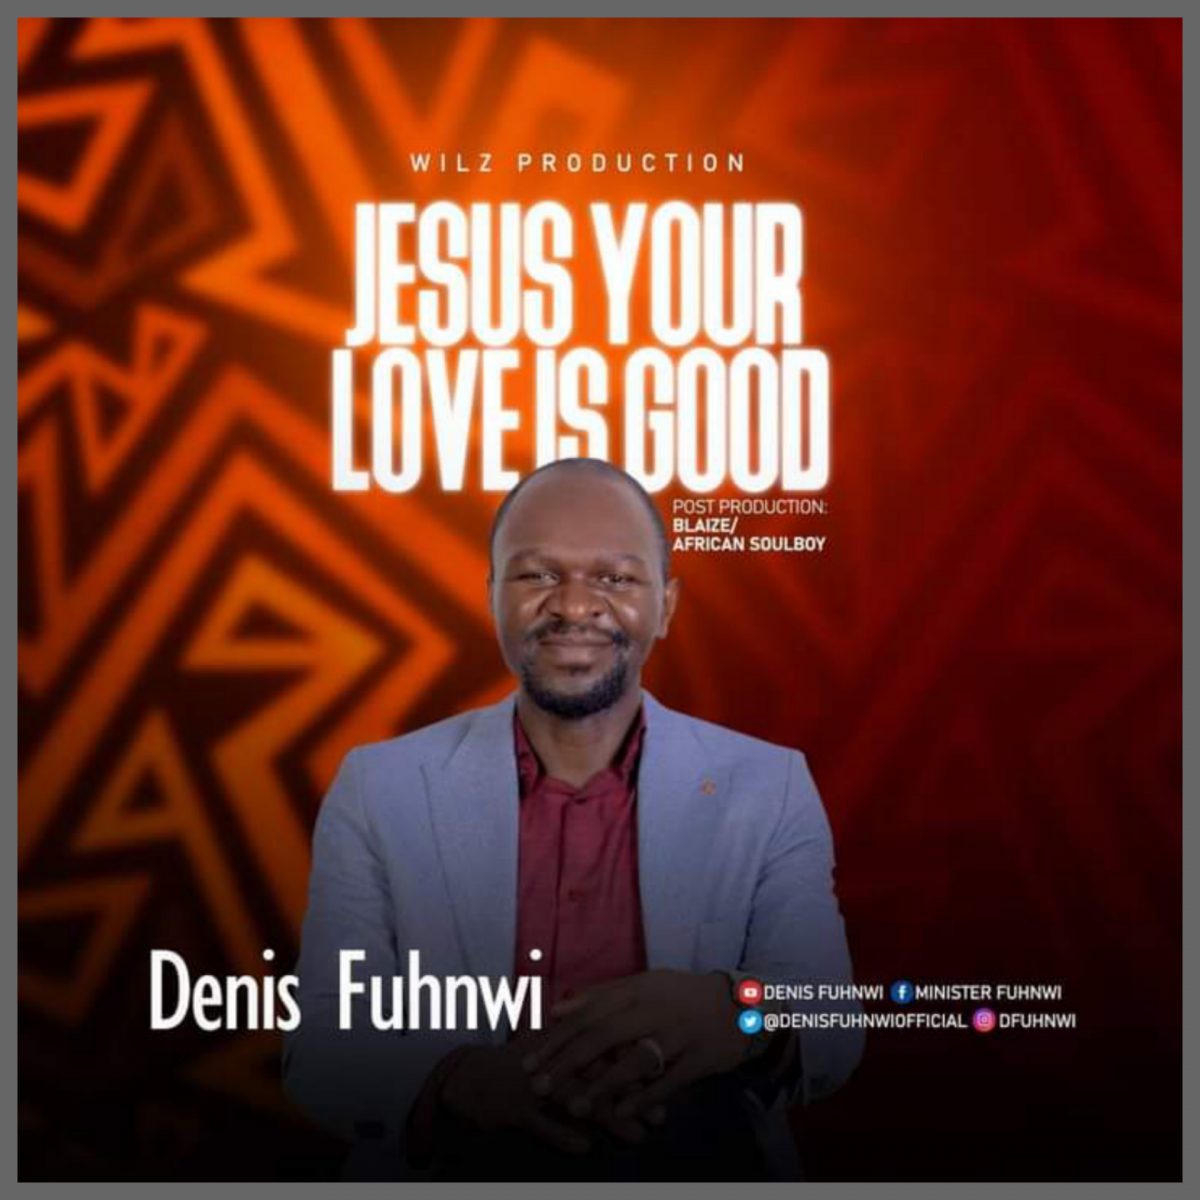 Jesus Your Love Is Good By Denis Fuhnwi